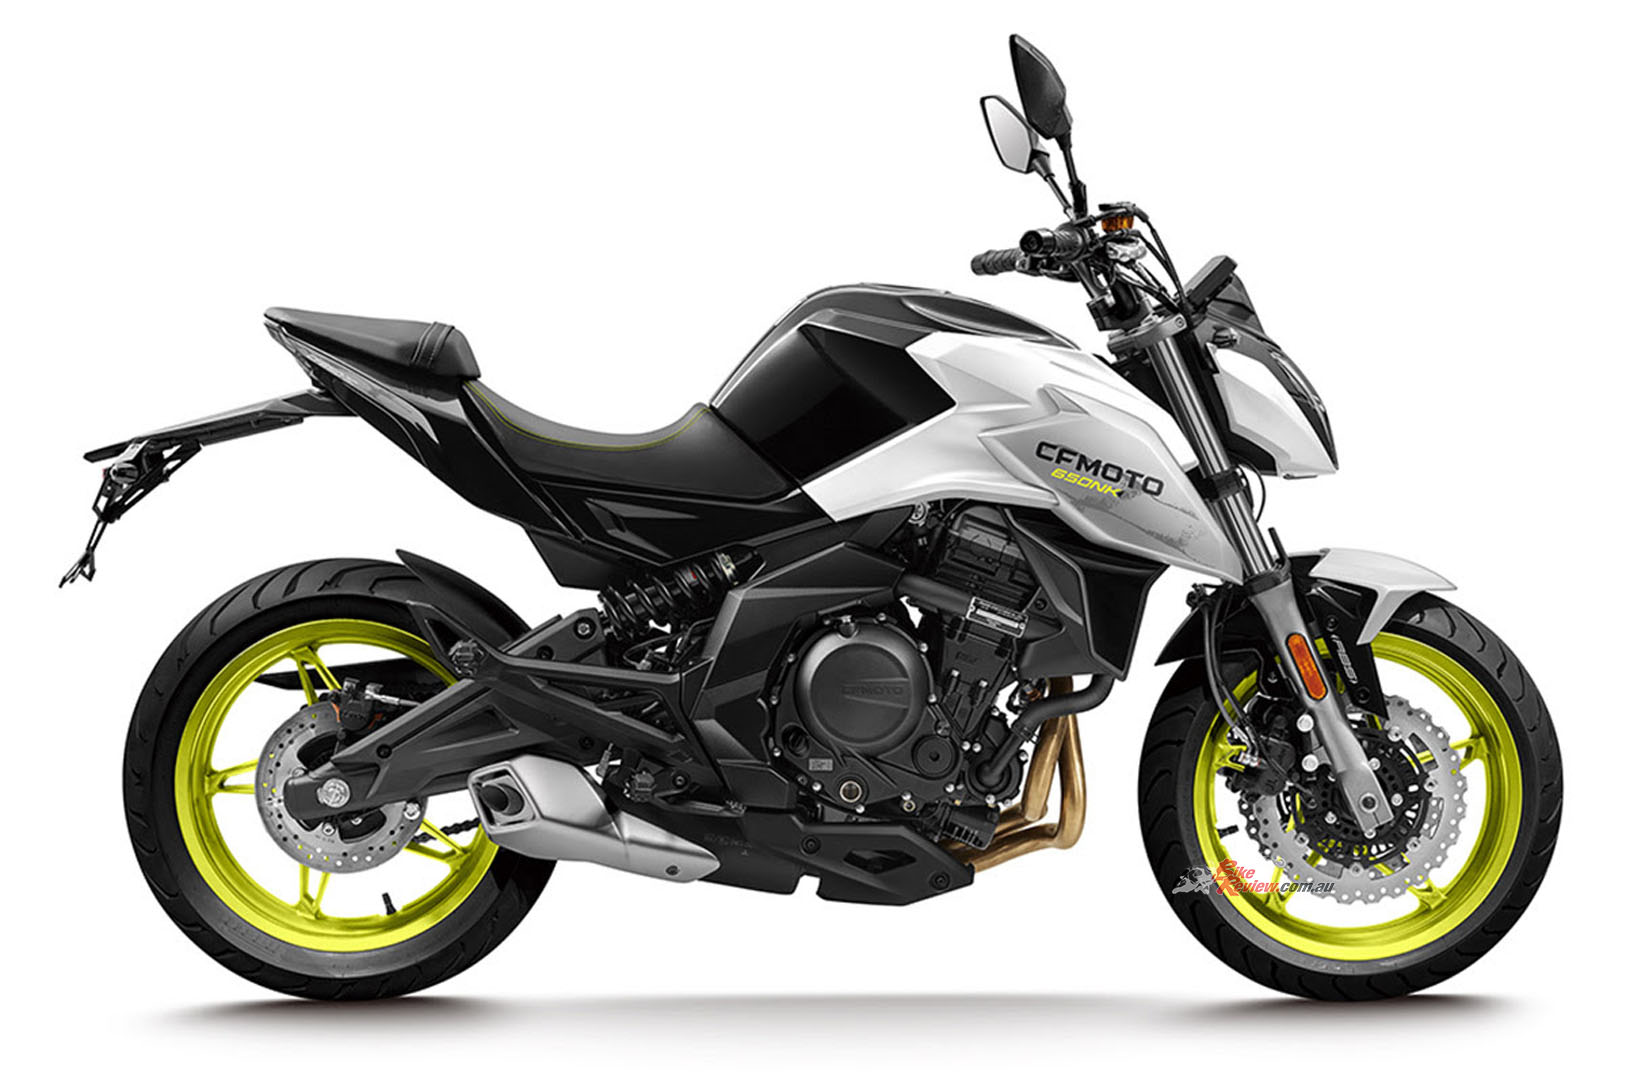 The popular 650 twin models from CFMoto have received a few updates for 2022...